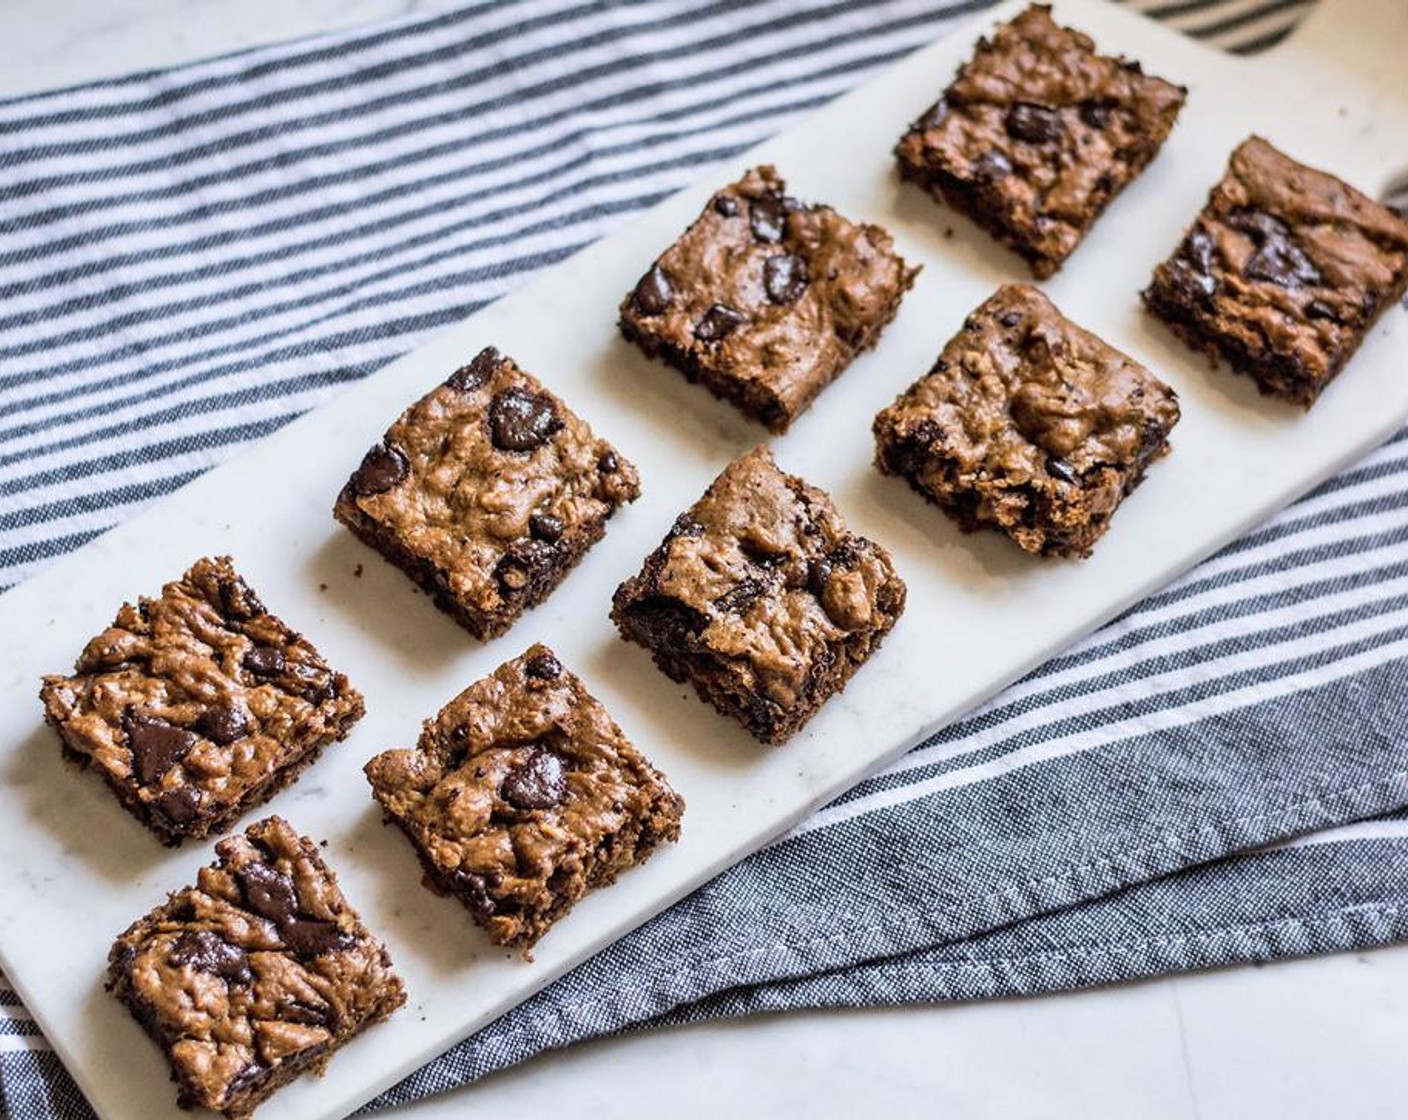 Flourless Chocolate Peanut Butter and Oat Bars